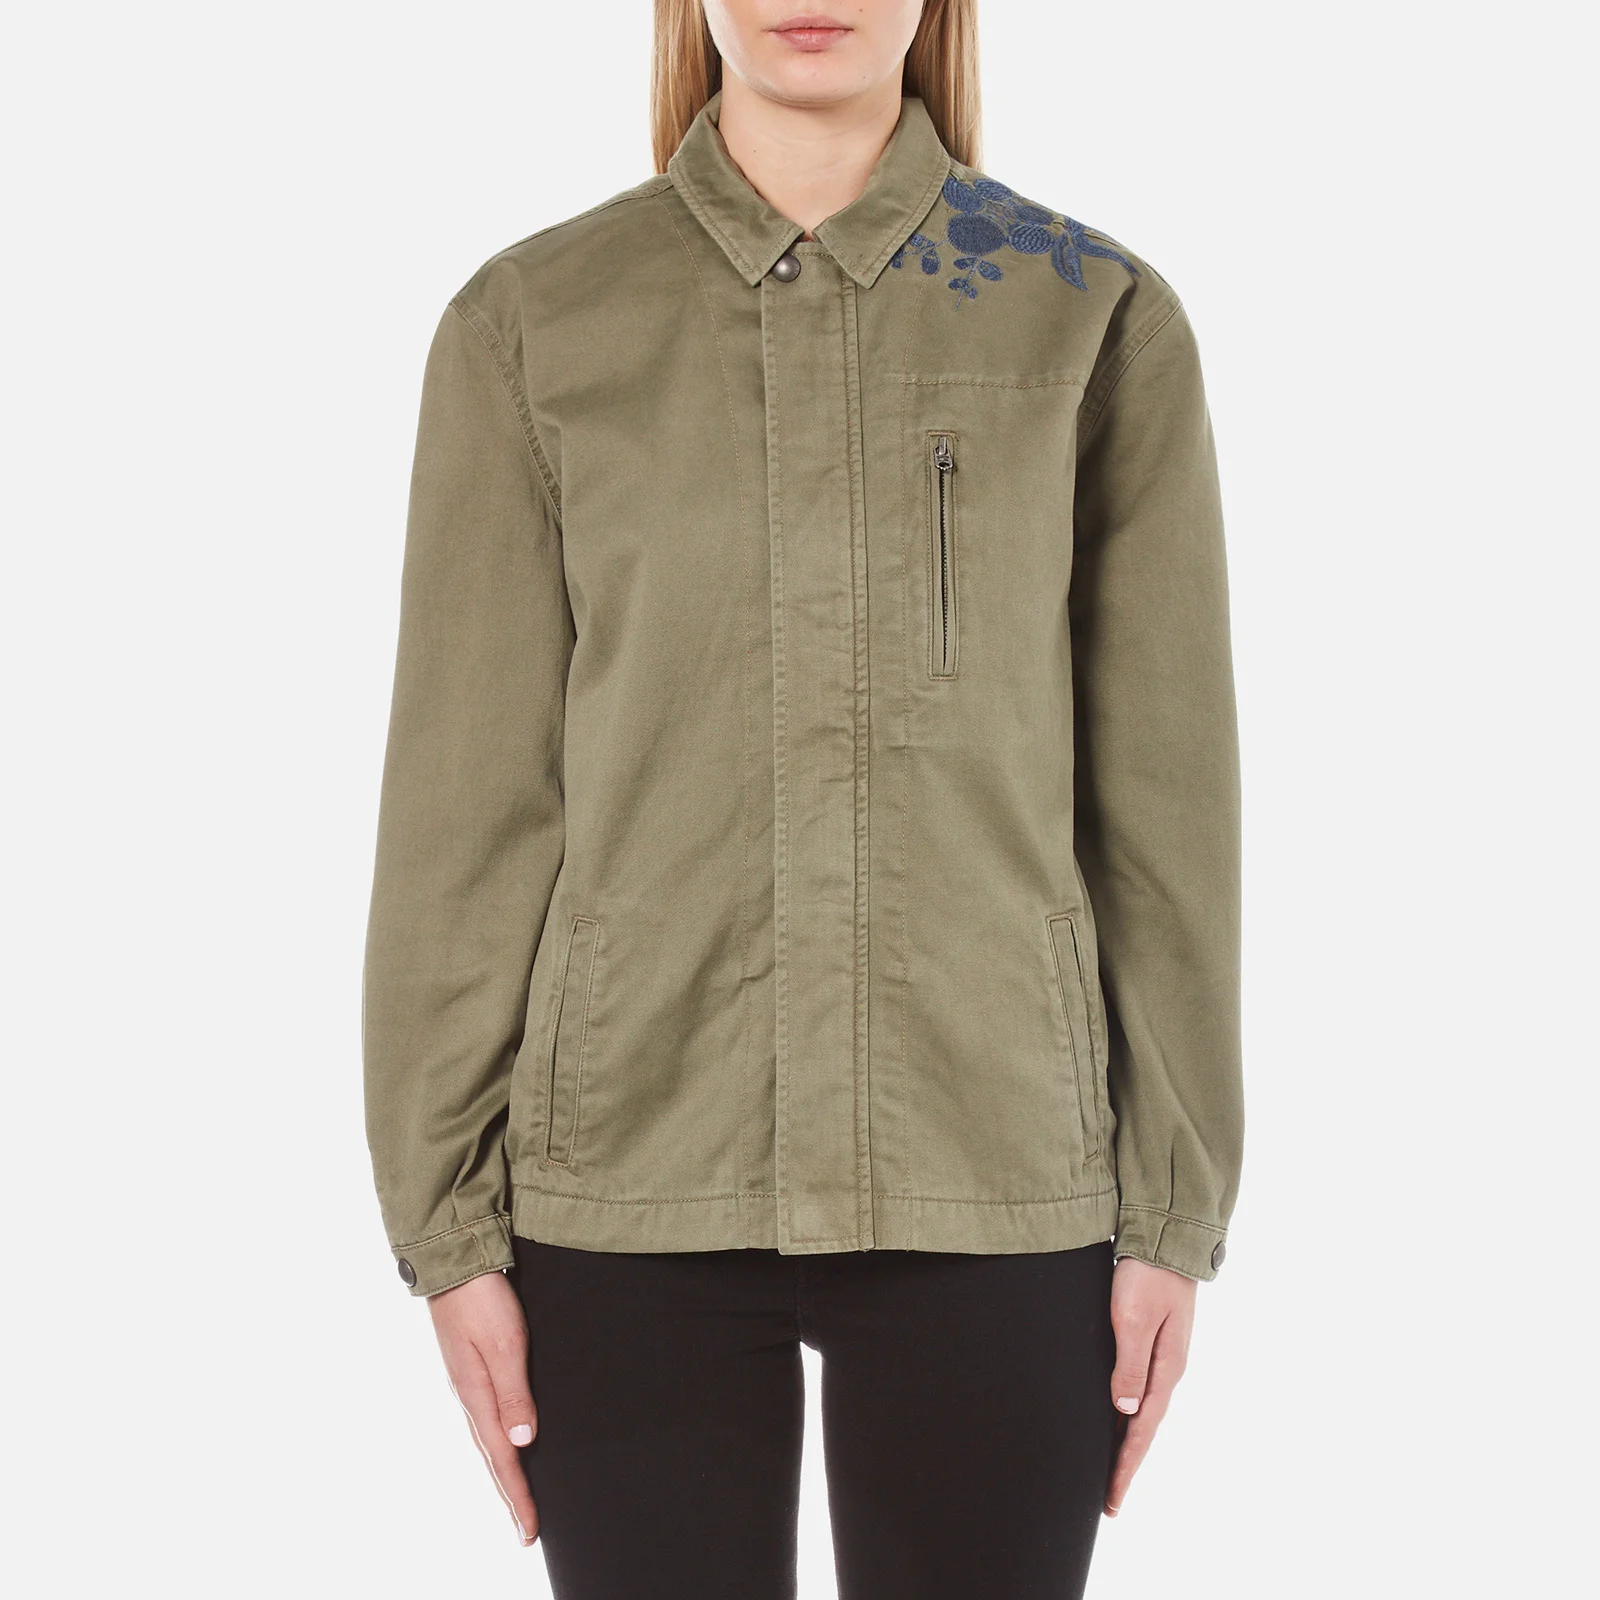 Maison Scotch Women's Army Jacket with Embroidery - Military Green Image 1